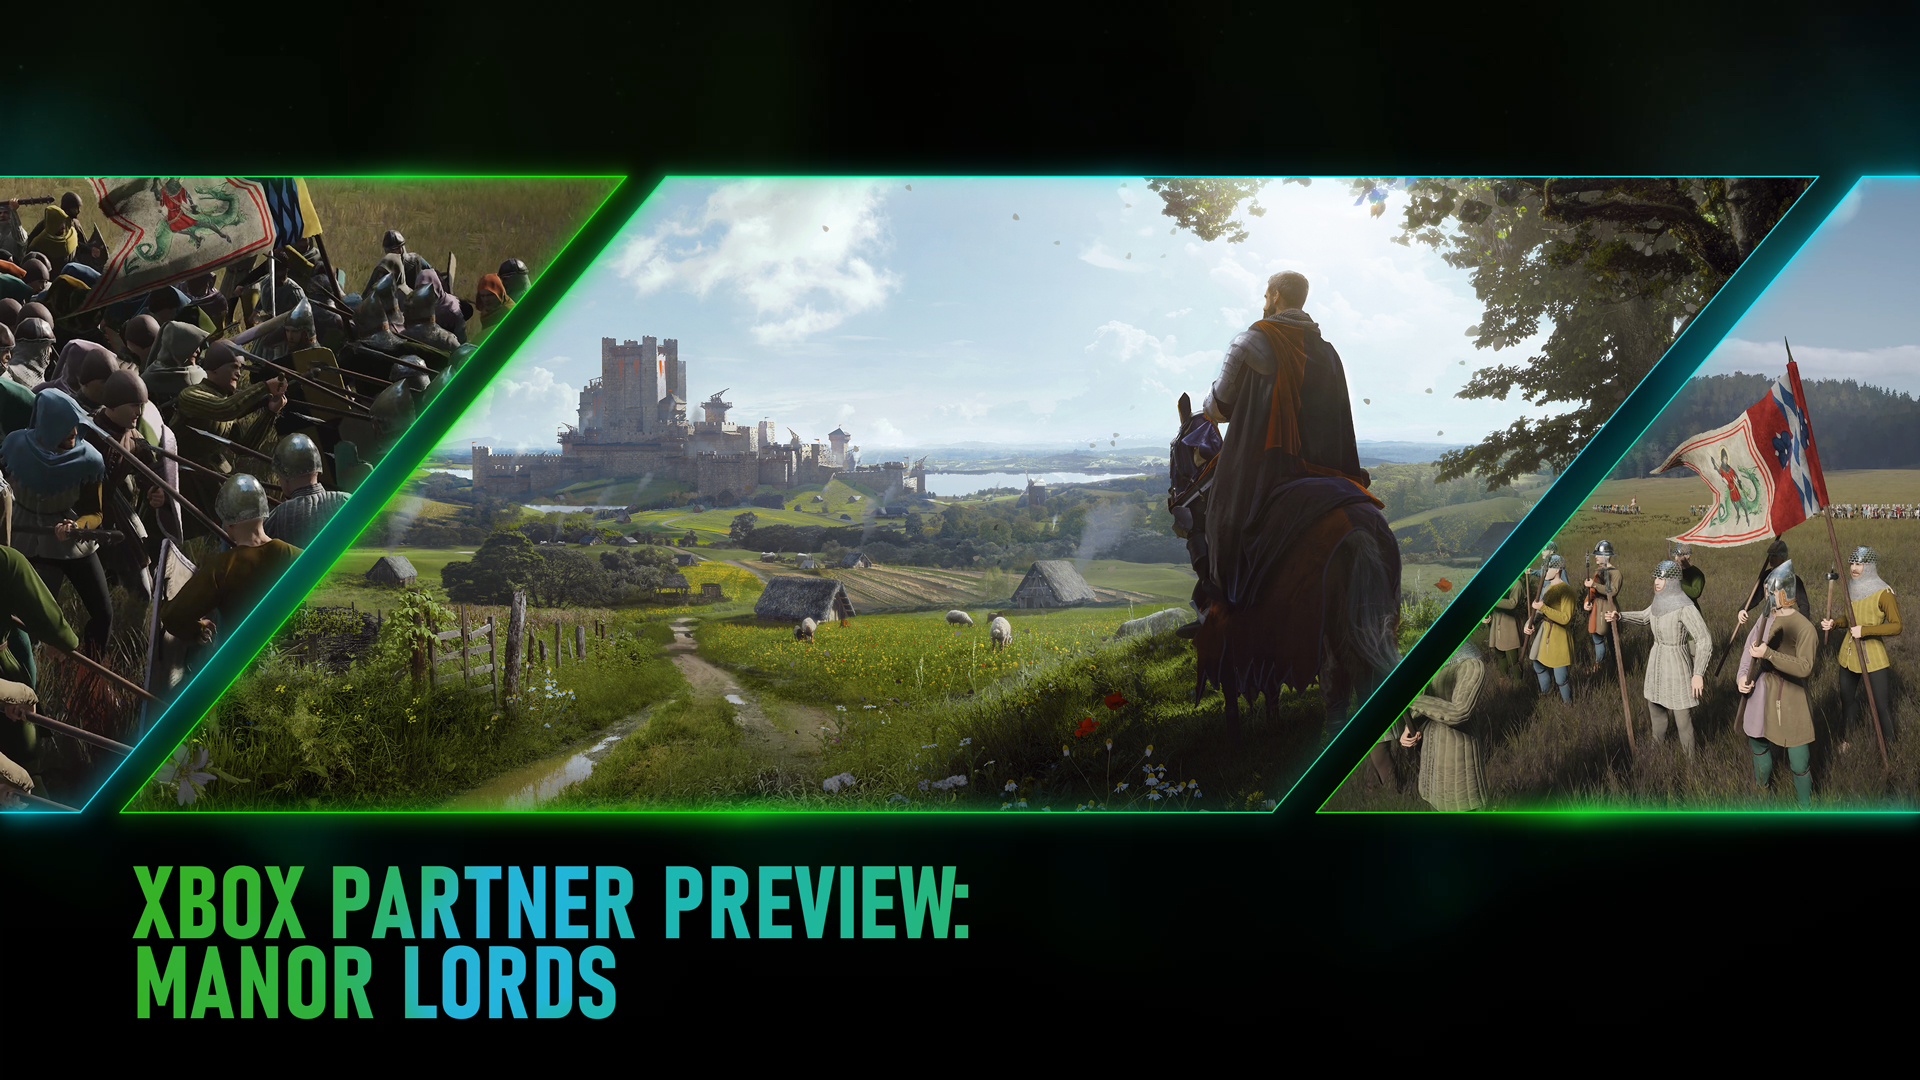 Xbox Partner Preview: Manor Lords Combines Historical Accuracy and Dynamic Settings For the Ultimate Medieval Experience